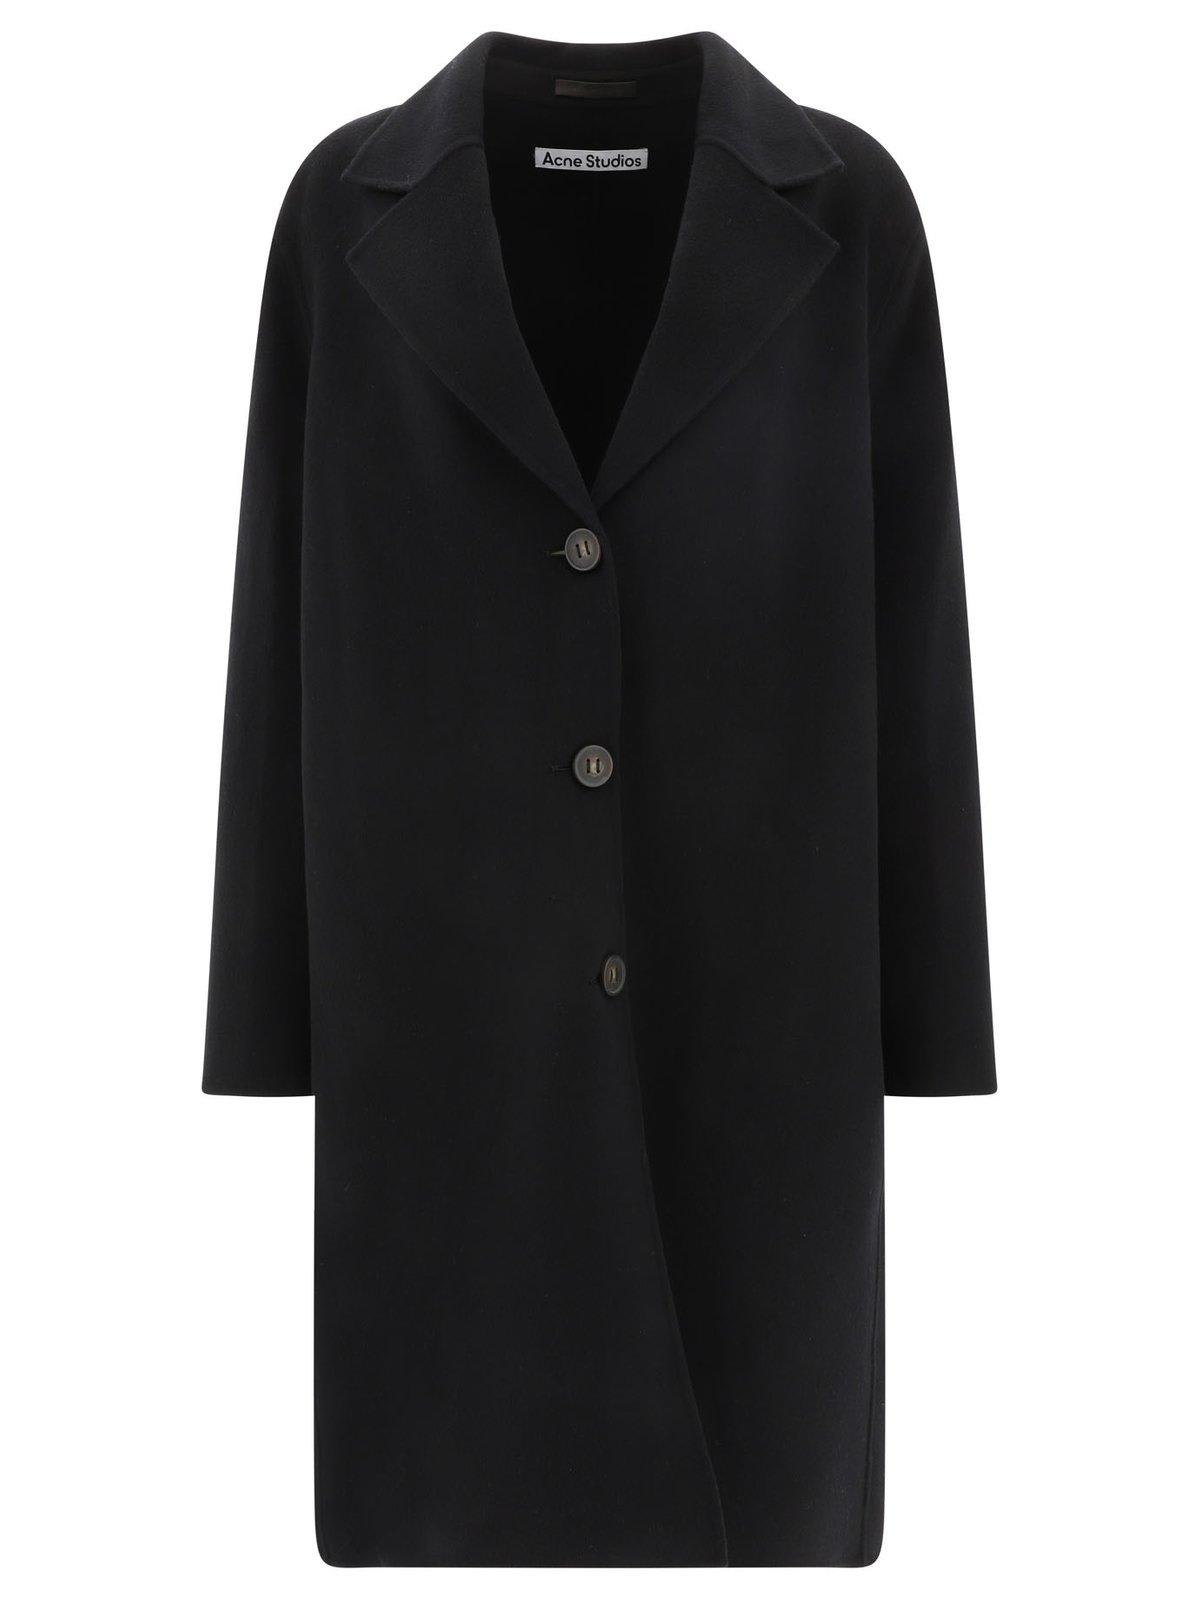 ACNE STUDIOS SINGLE-BREASTED BUTTONED COAT